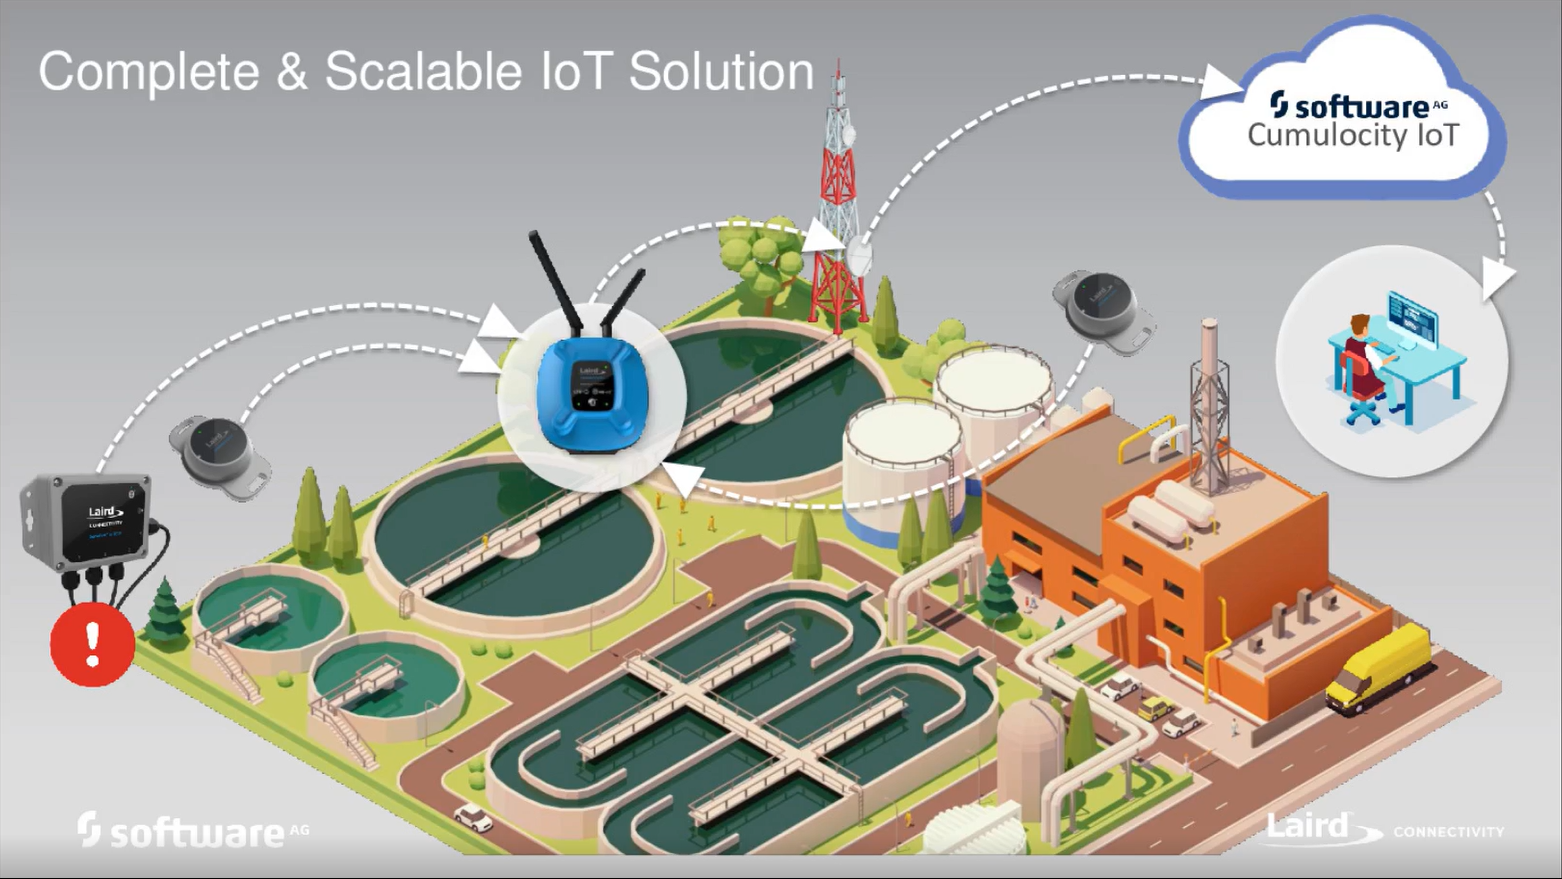 The Easy Button: Go from sensors to business outcomes rapidly with Cumulocity IoT and Laird Connectivity